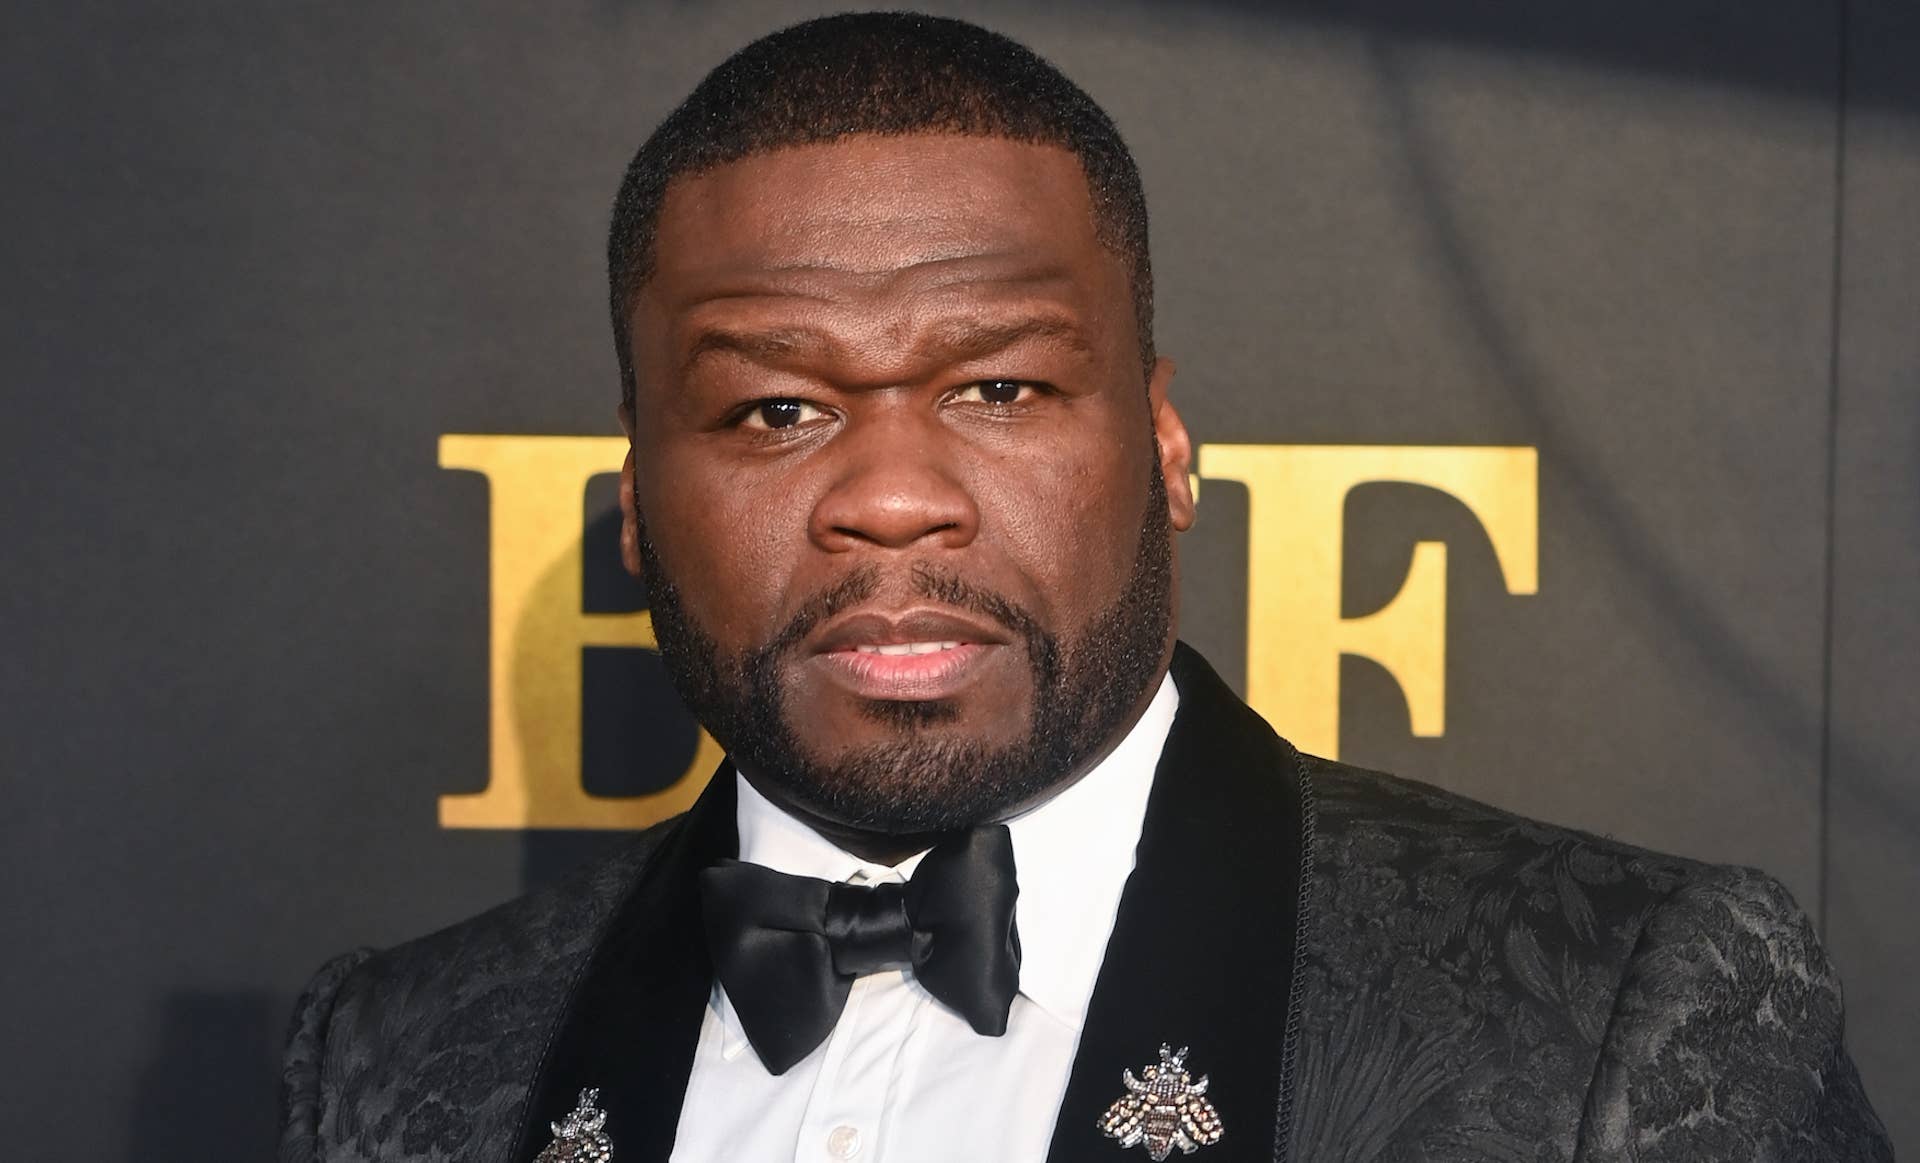 50 Cent Says Next Album May Be His Last, Claims He's Top 10 Rapper ...